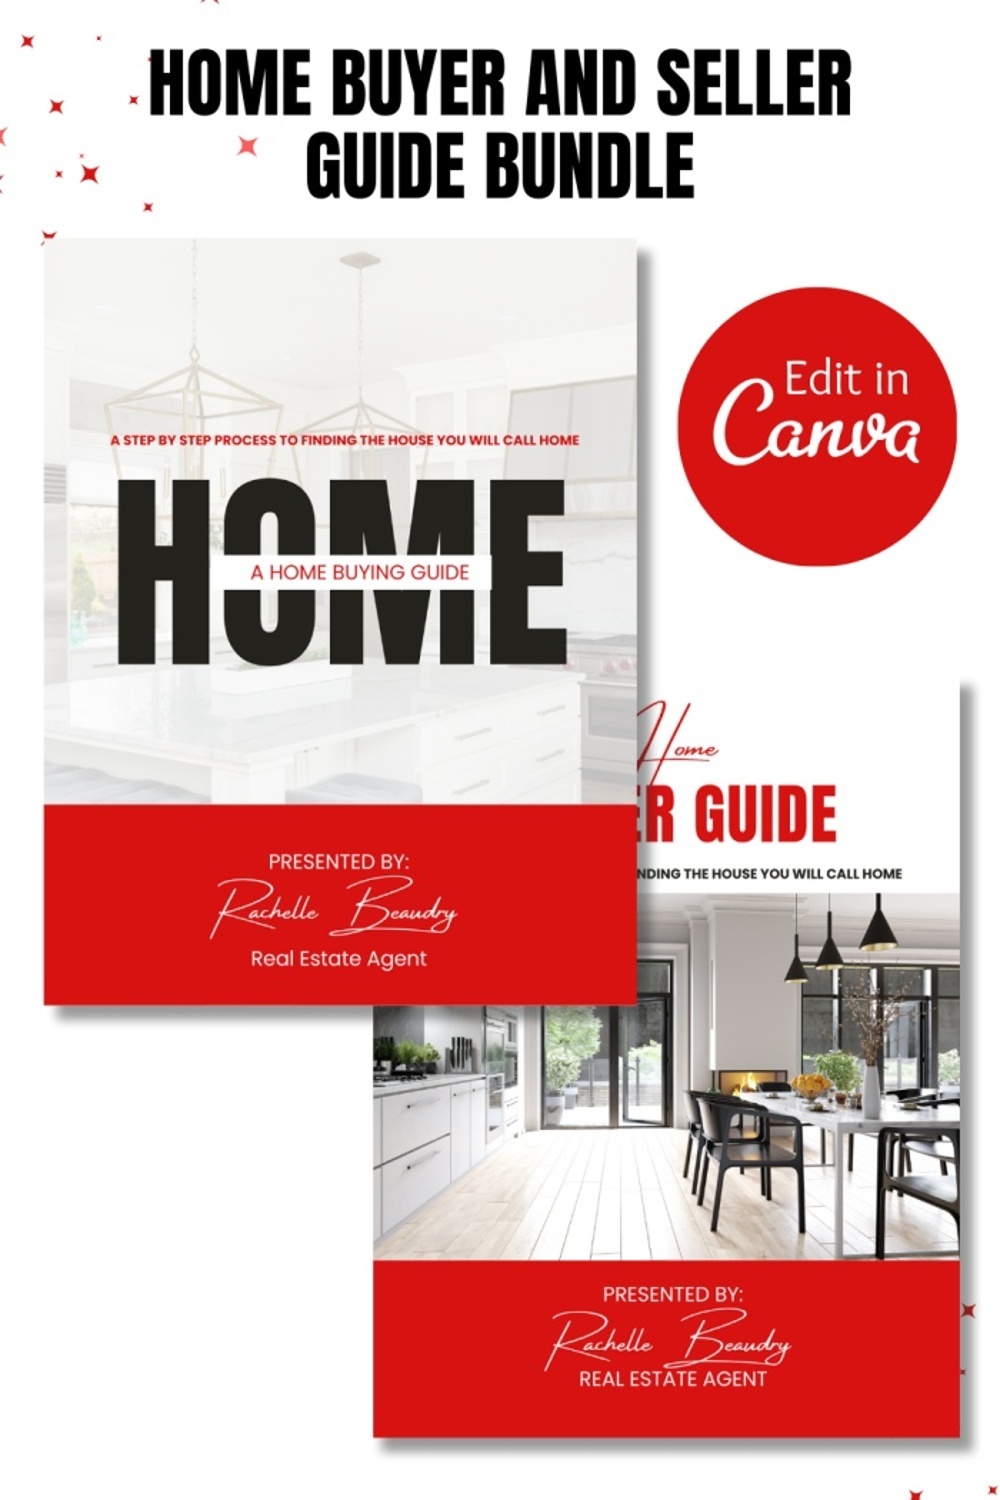 Real Estate Seller Guide & Home Buyer Guide Bundle | Real Estate Marketing | Home Seller Guide | CMA Packet | Listing Presentation | Canva | Fall Presentation canva pinterest preview image.